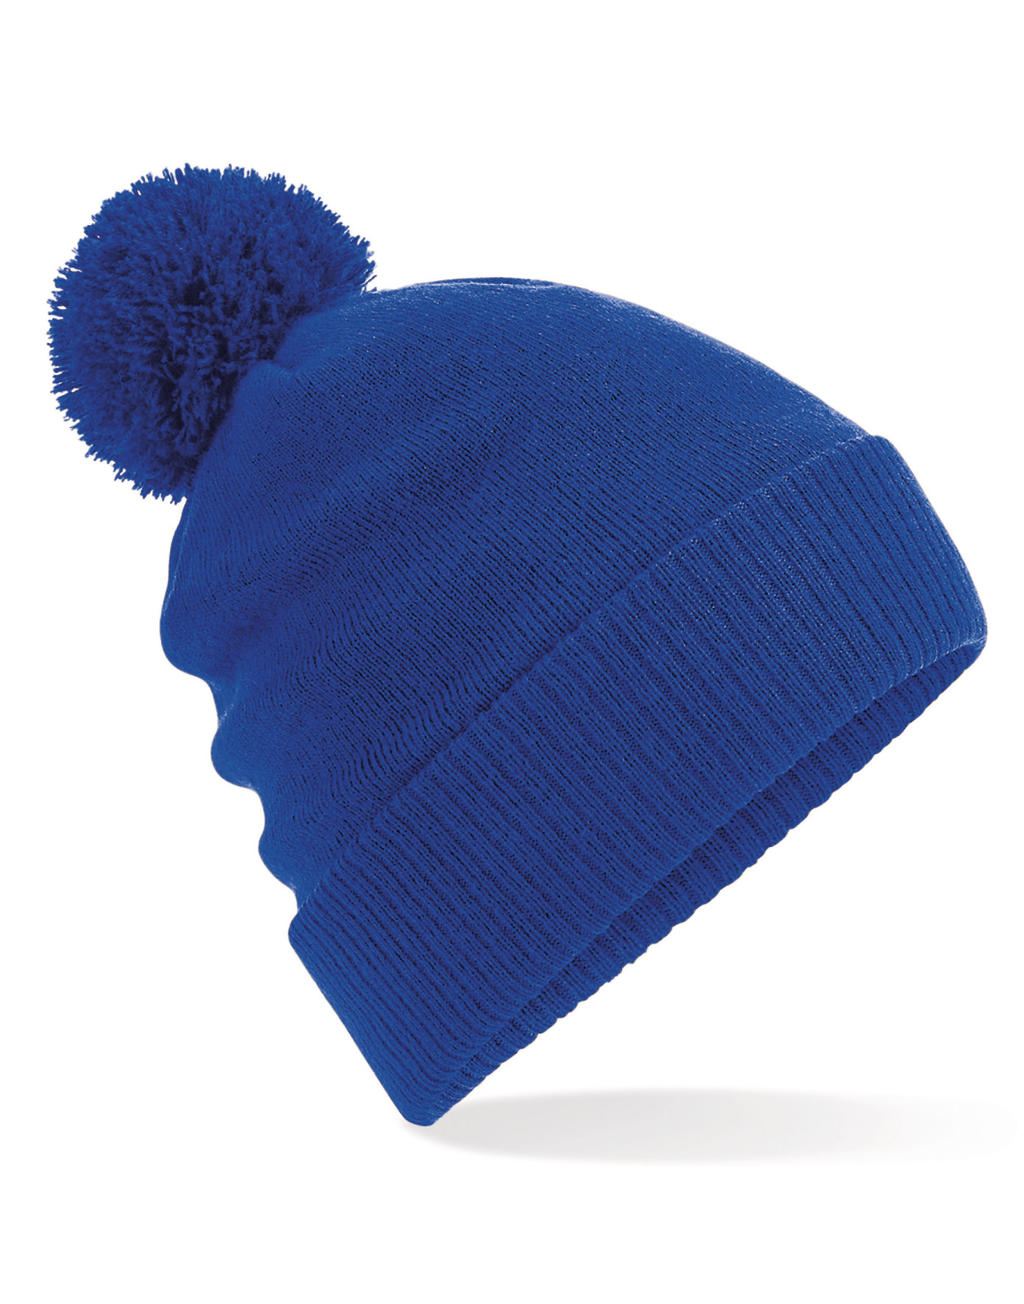  Thermal Snowstar? Beanie in Farbe Bright Royal